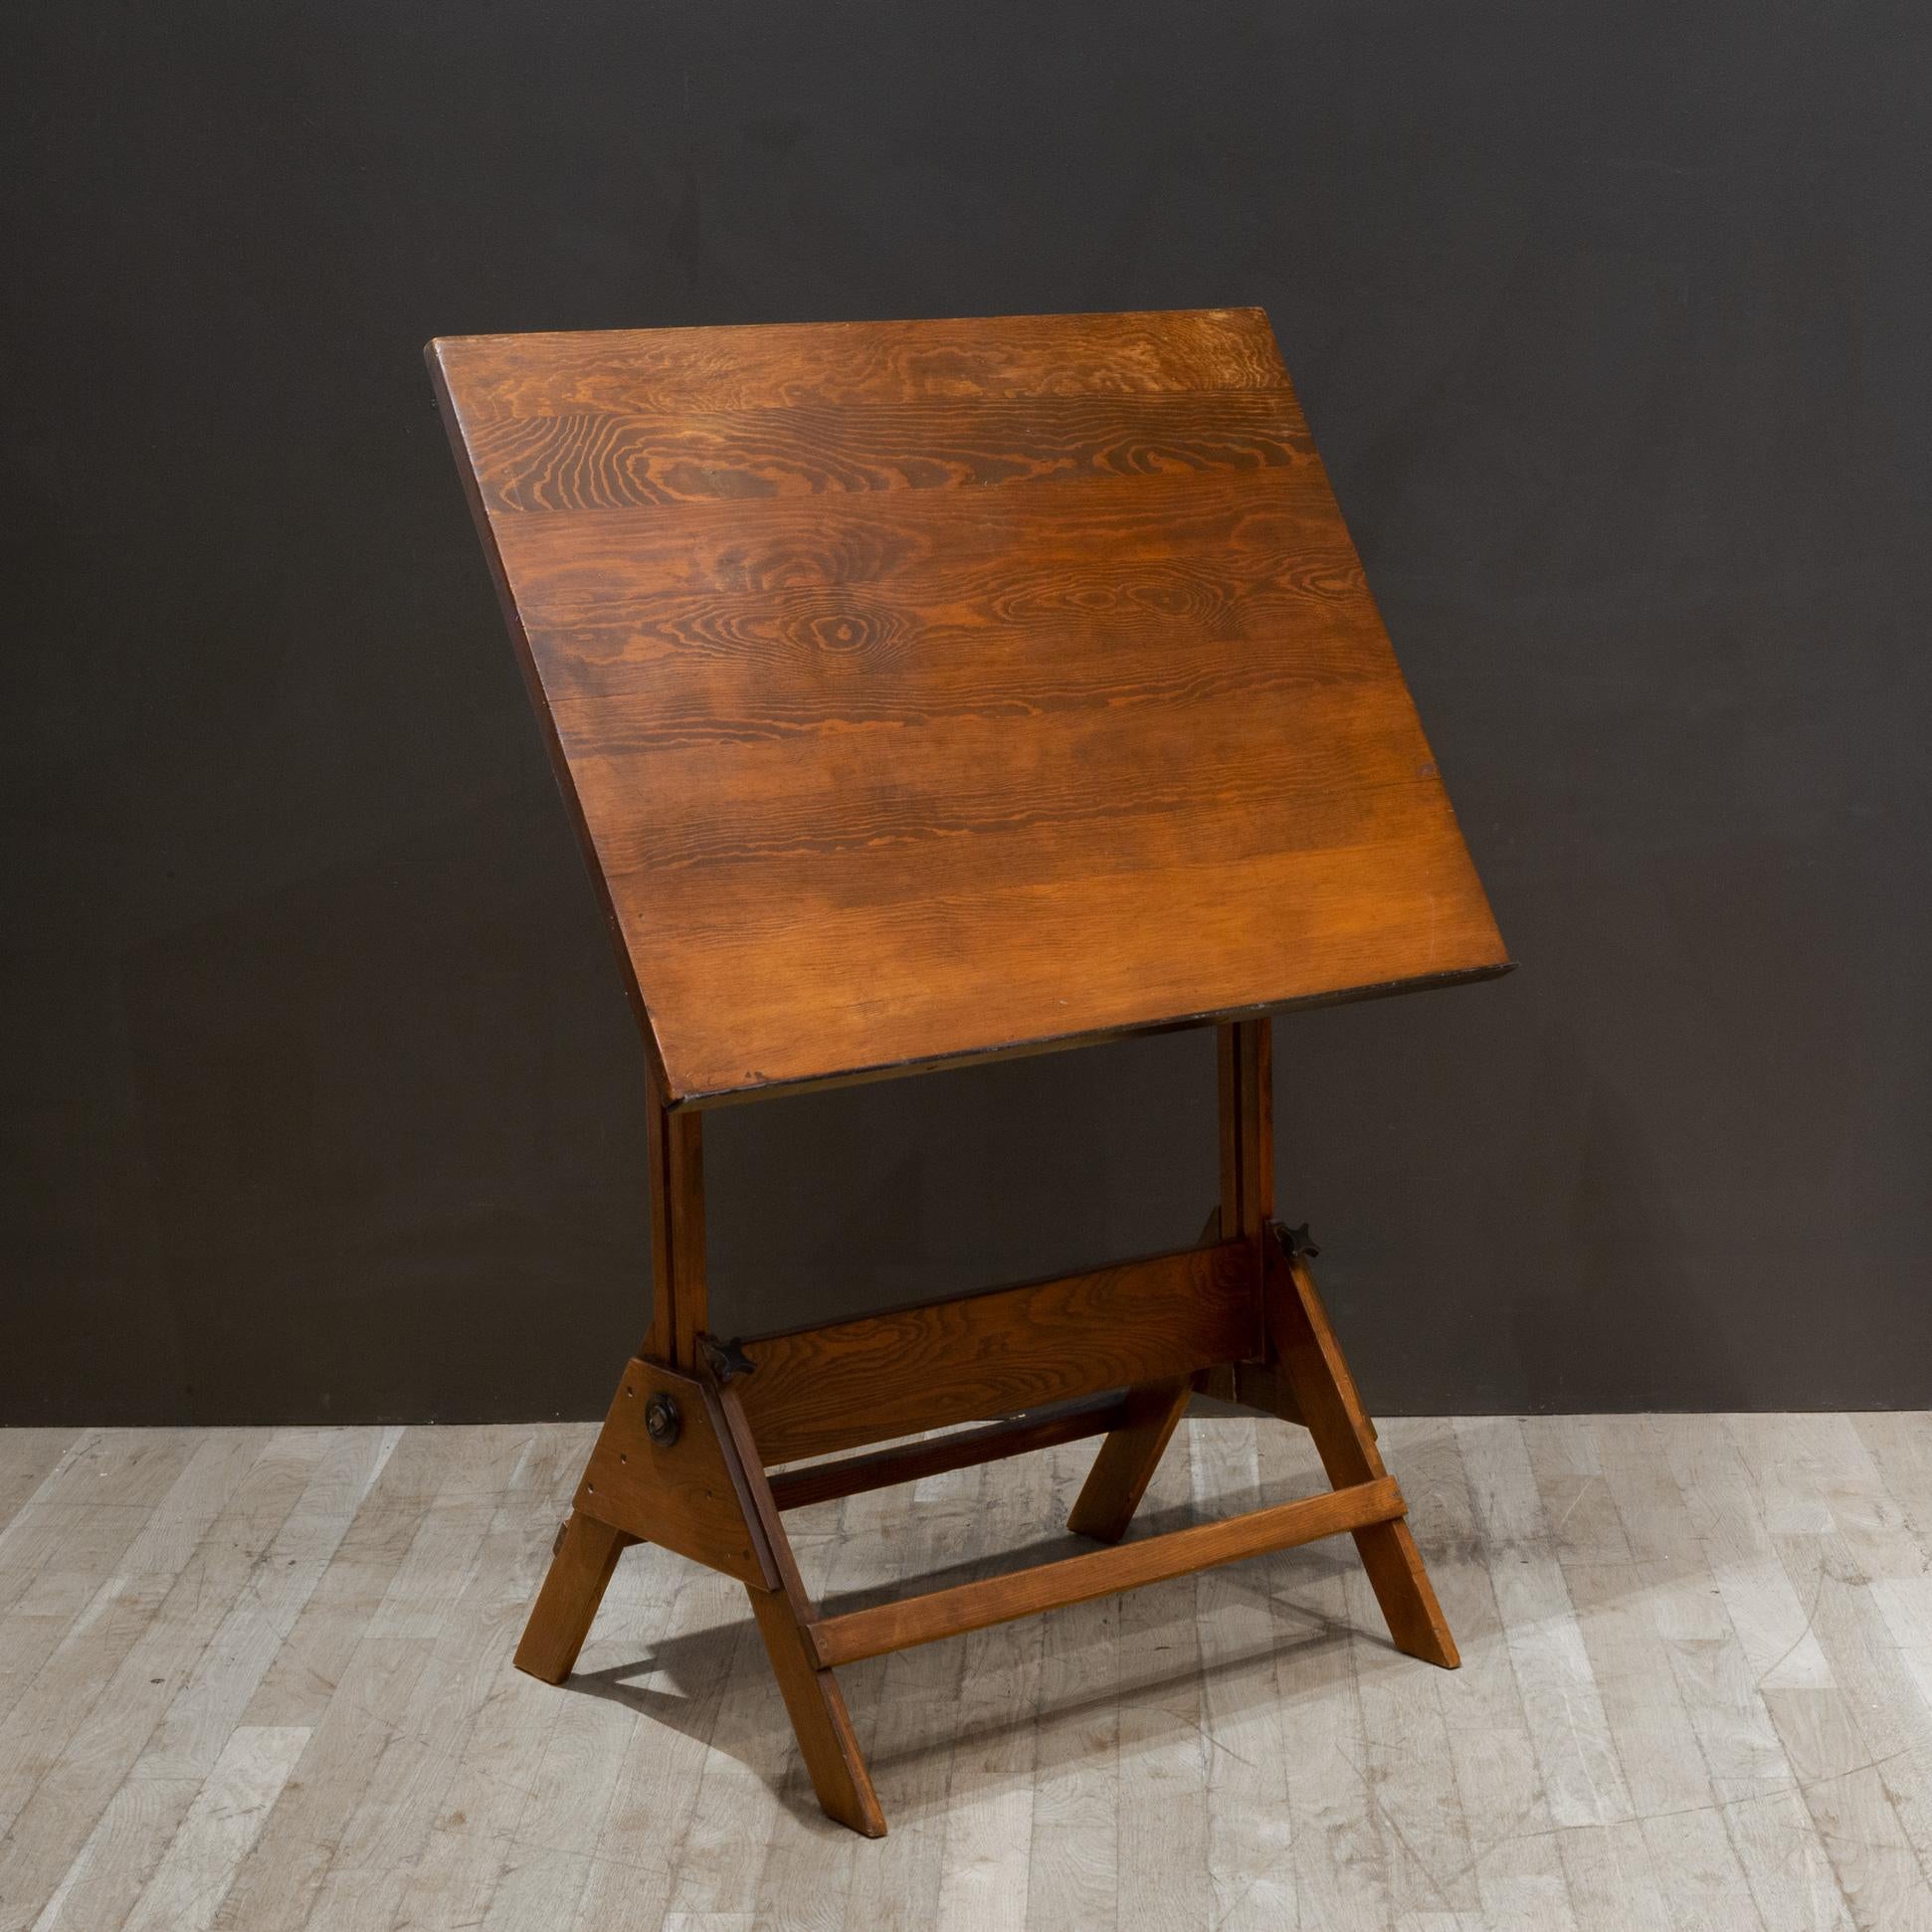 Steel Vintage Anco Bilt Cast Iron and Wood Drafting Table/Desk c.1950 For Sale